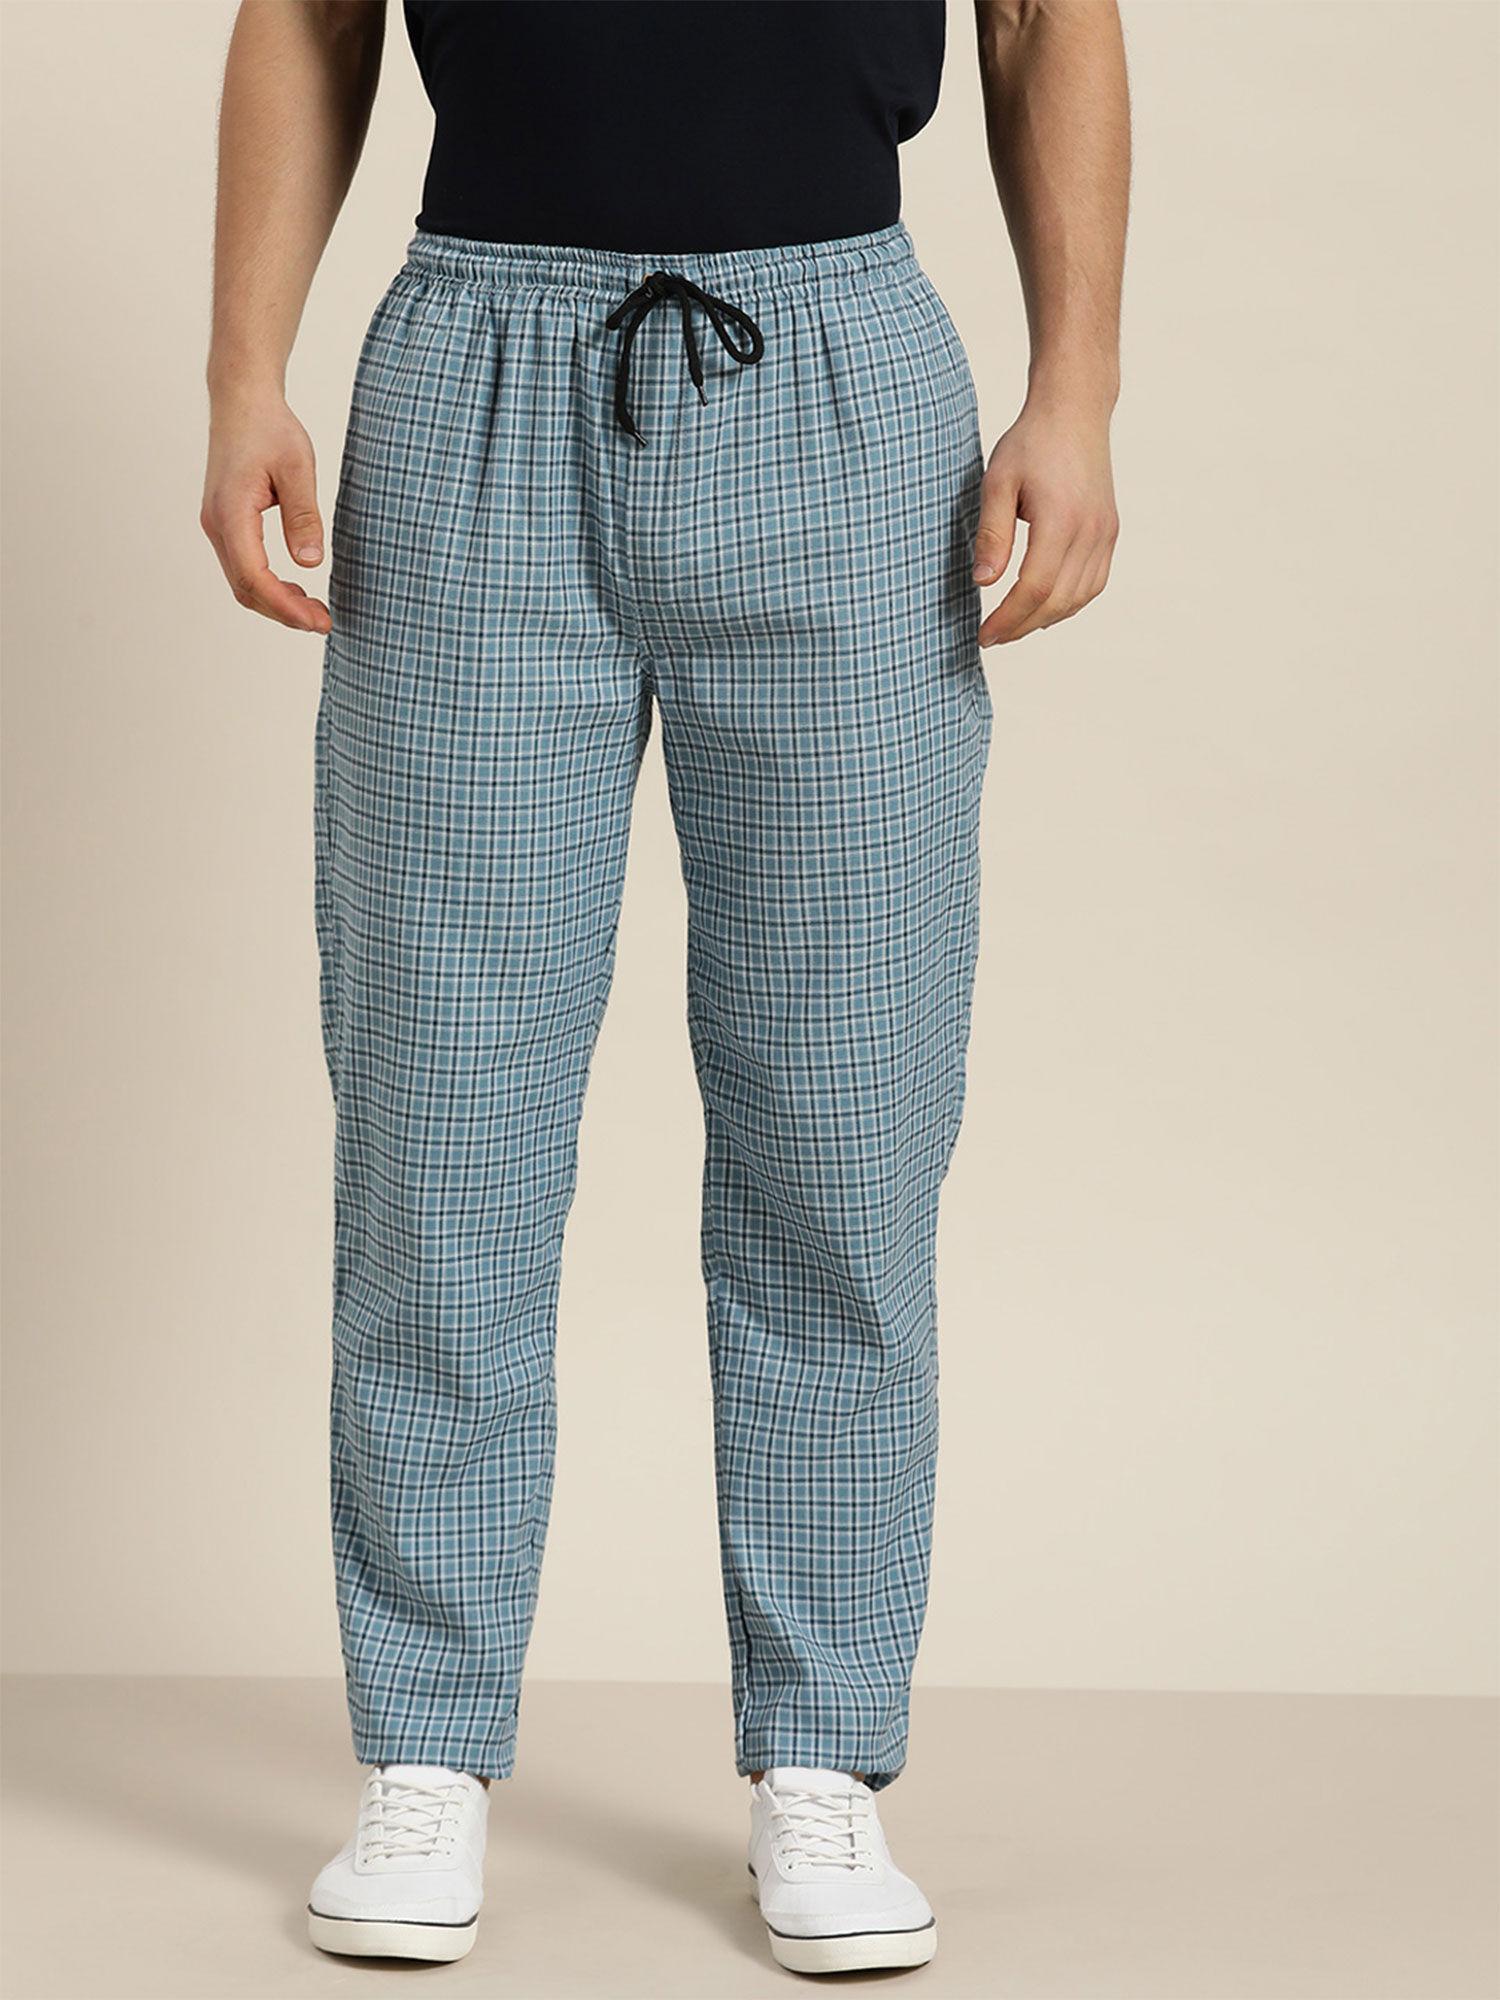 cotton teal blue & white checked track pant